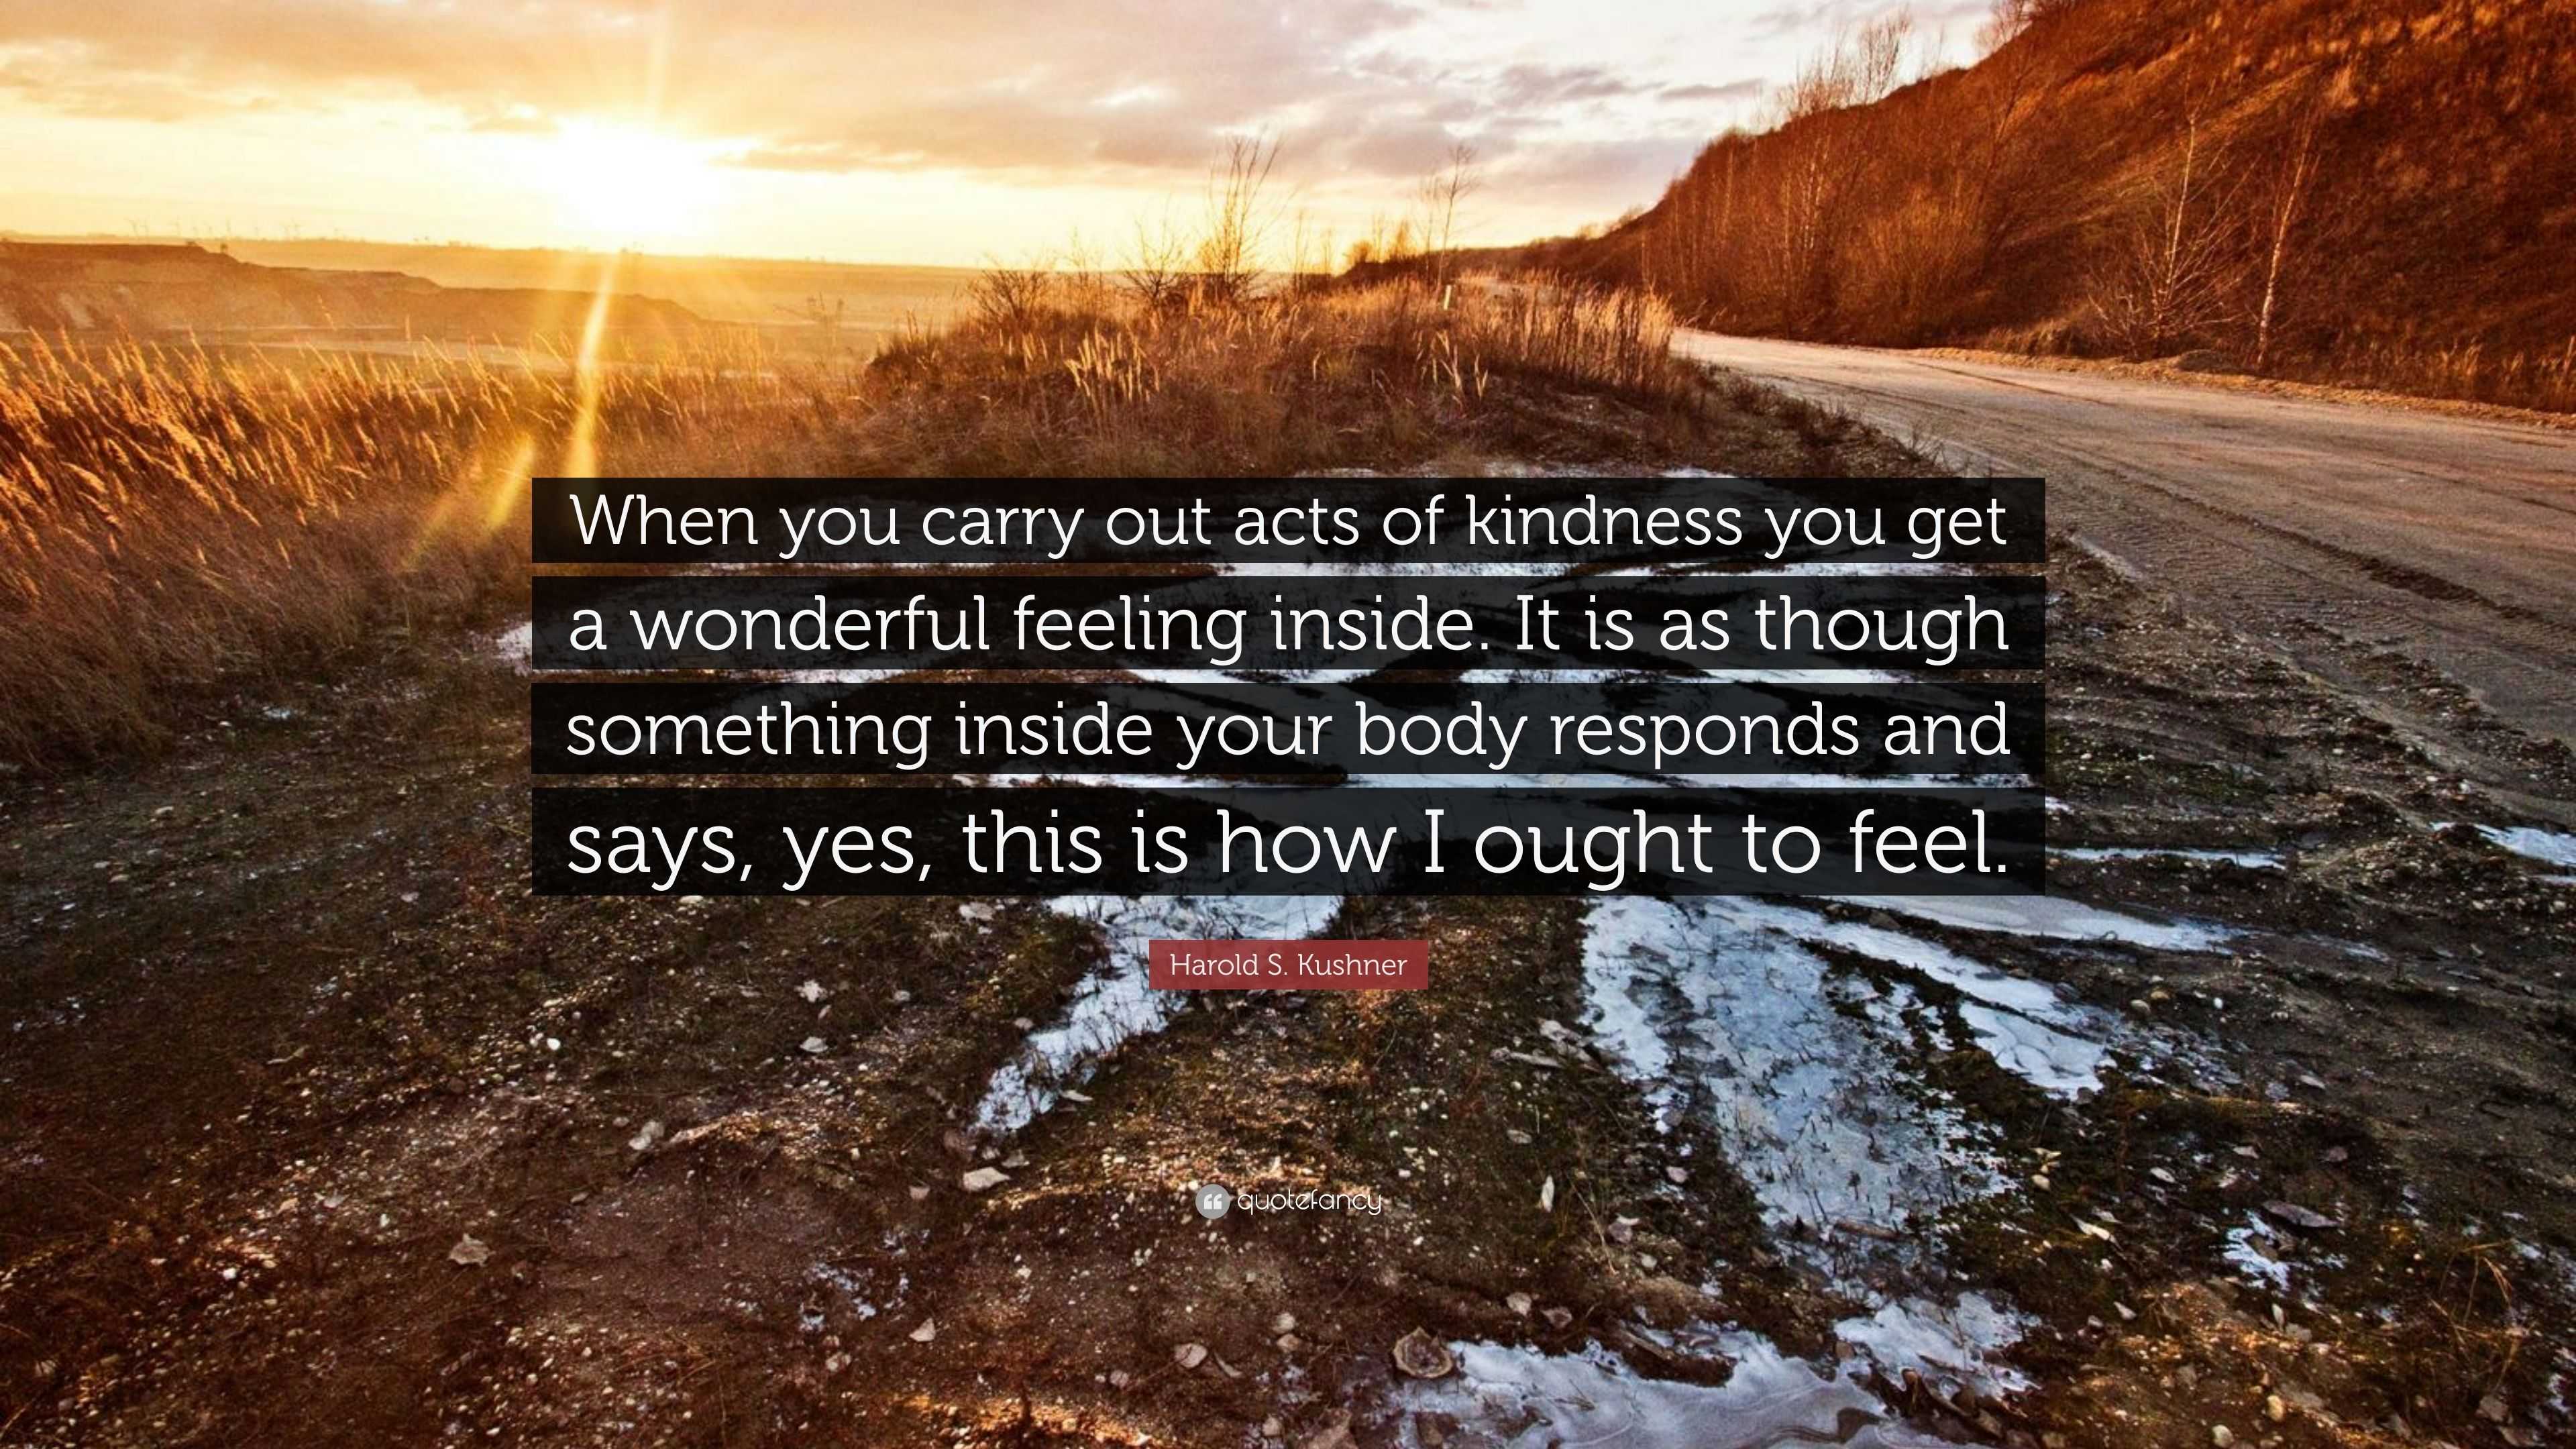 Harold S Kushner Quote “when You Carry Out Acts Of Kindness You Get A Wonderful Feeling Inside